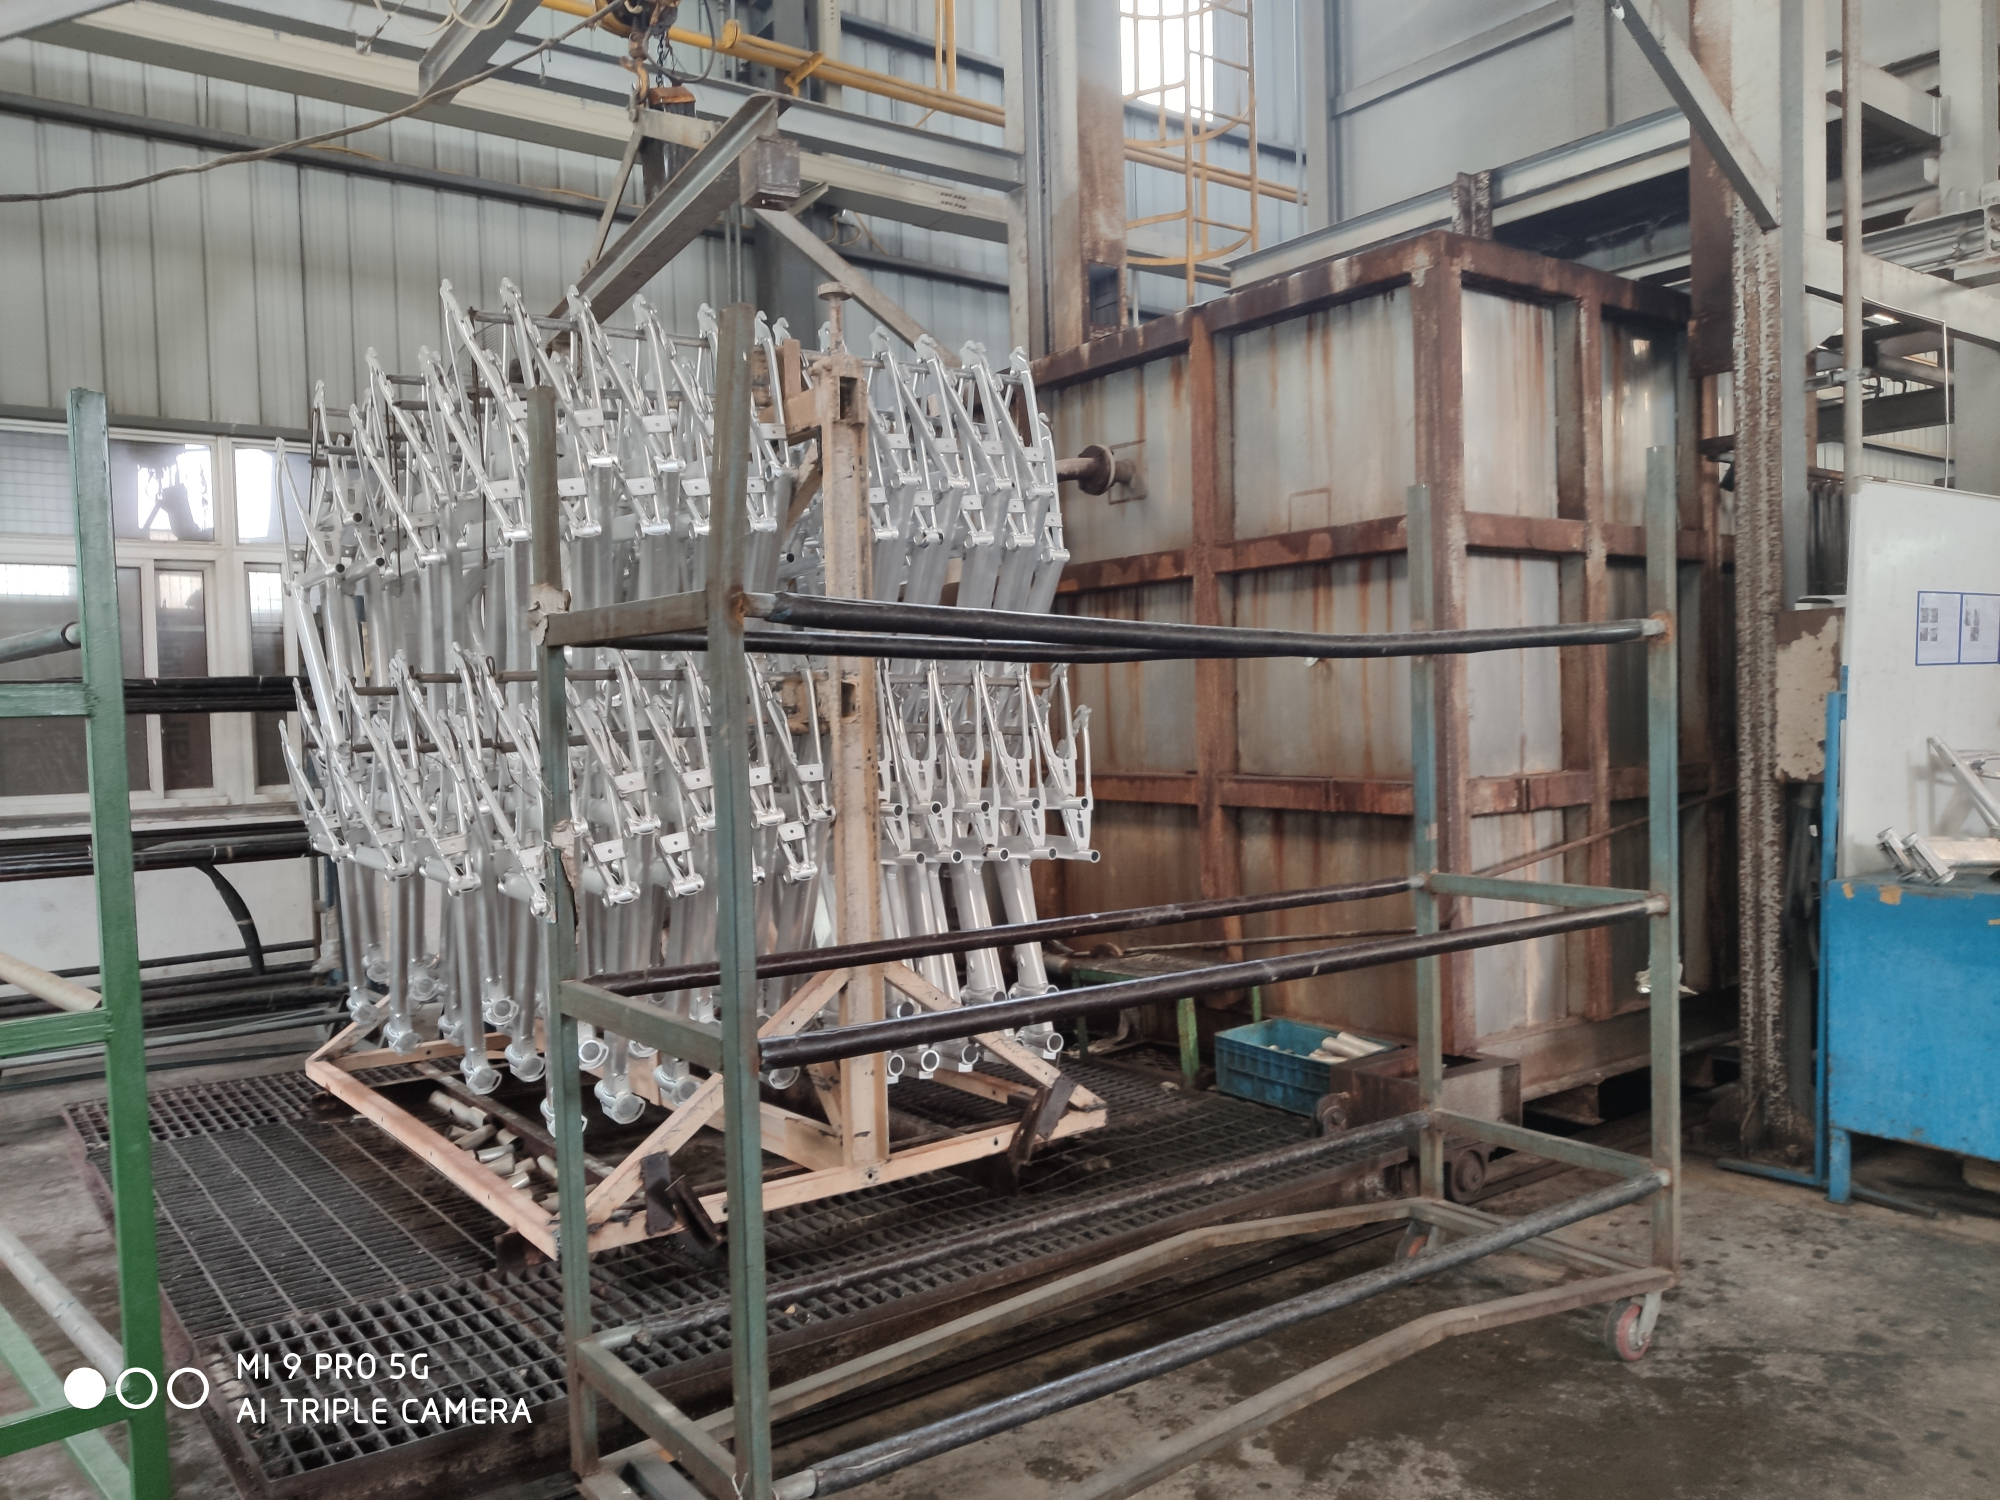 Video on aluminum alloy frame manufacturing process